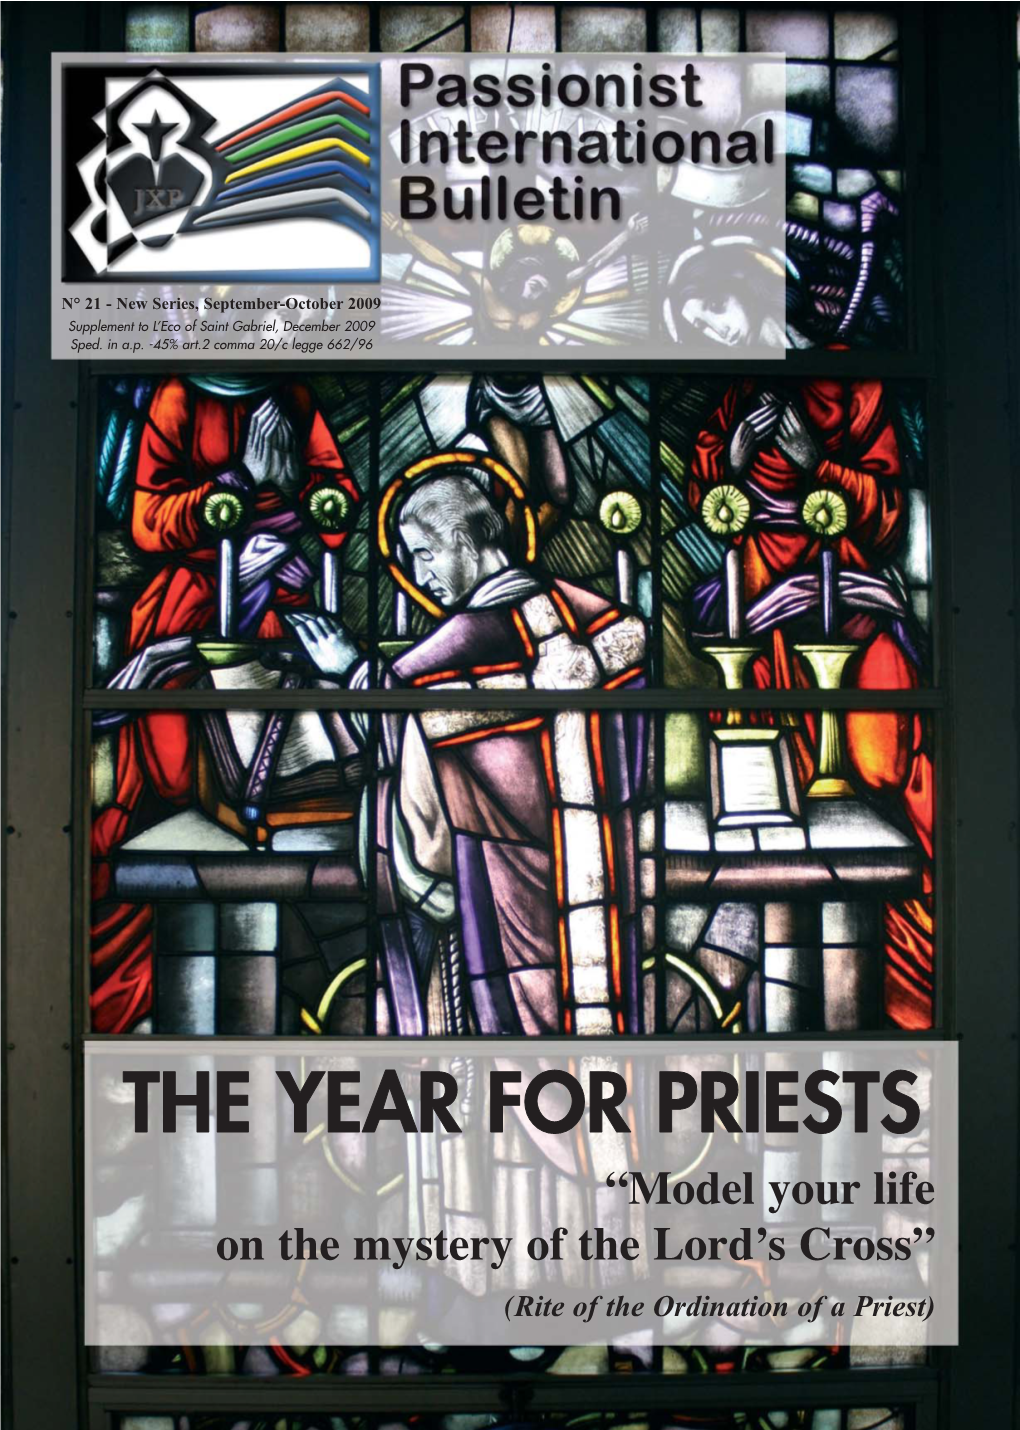 THE YEAR for PRIESTS “Model Your Life on the Mystery of the Lord’S Cross” (Rite of the Ordination of a Priest) INDEX Passionist Bulletin International N